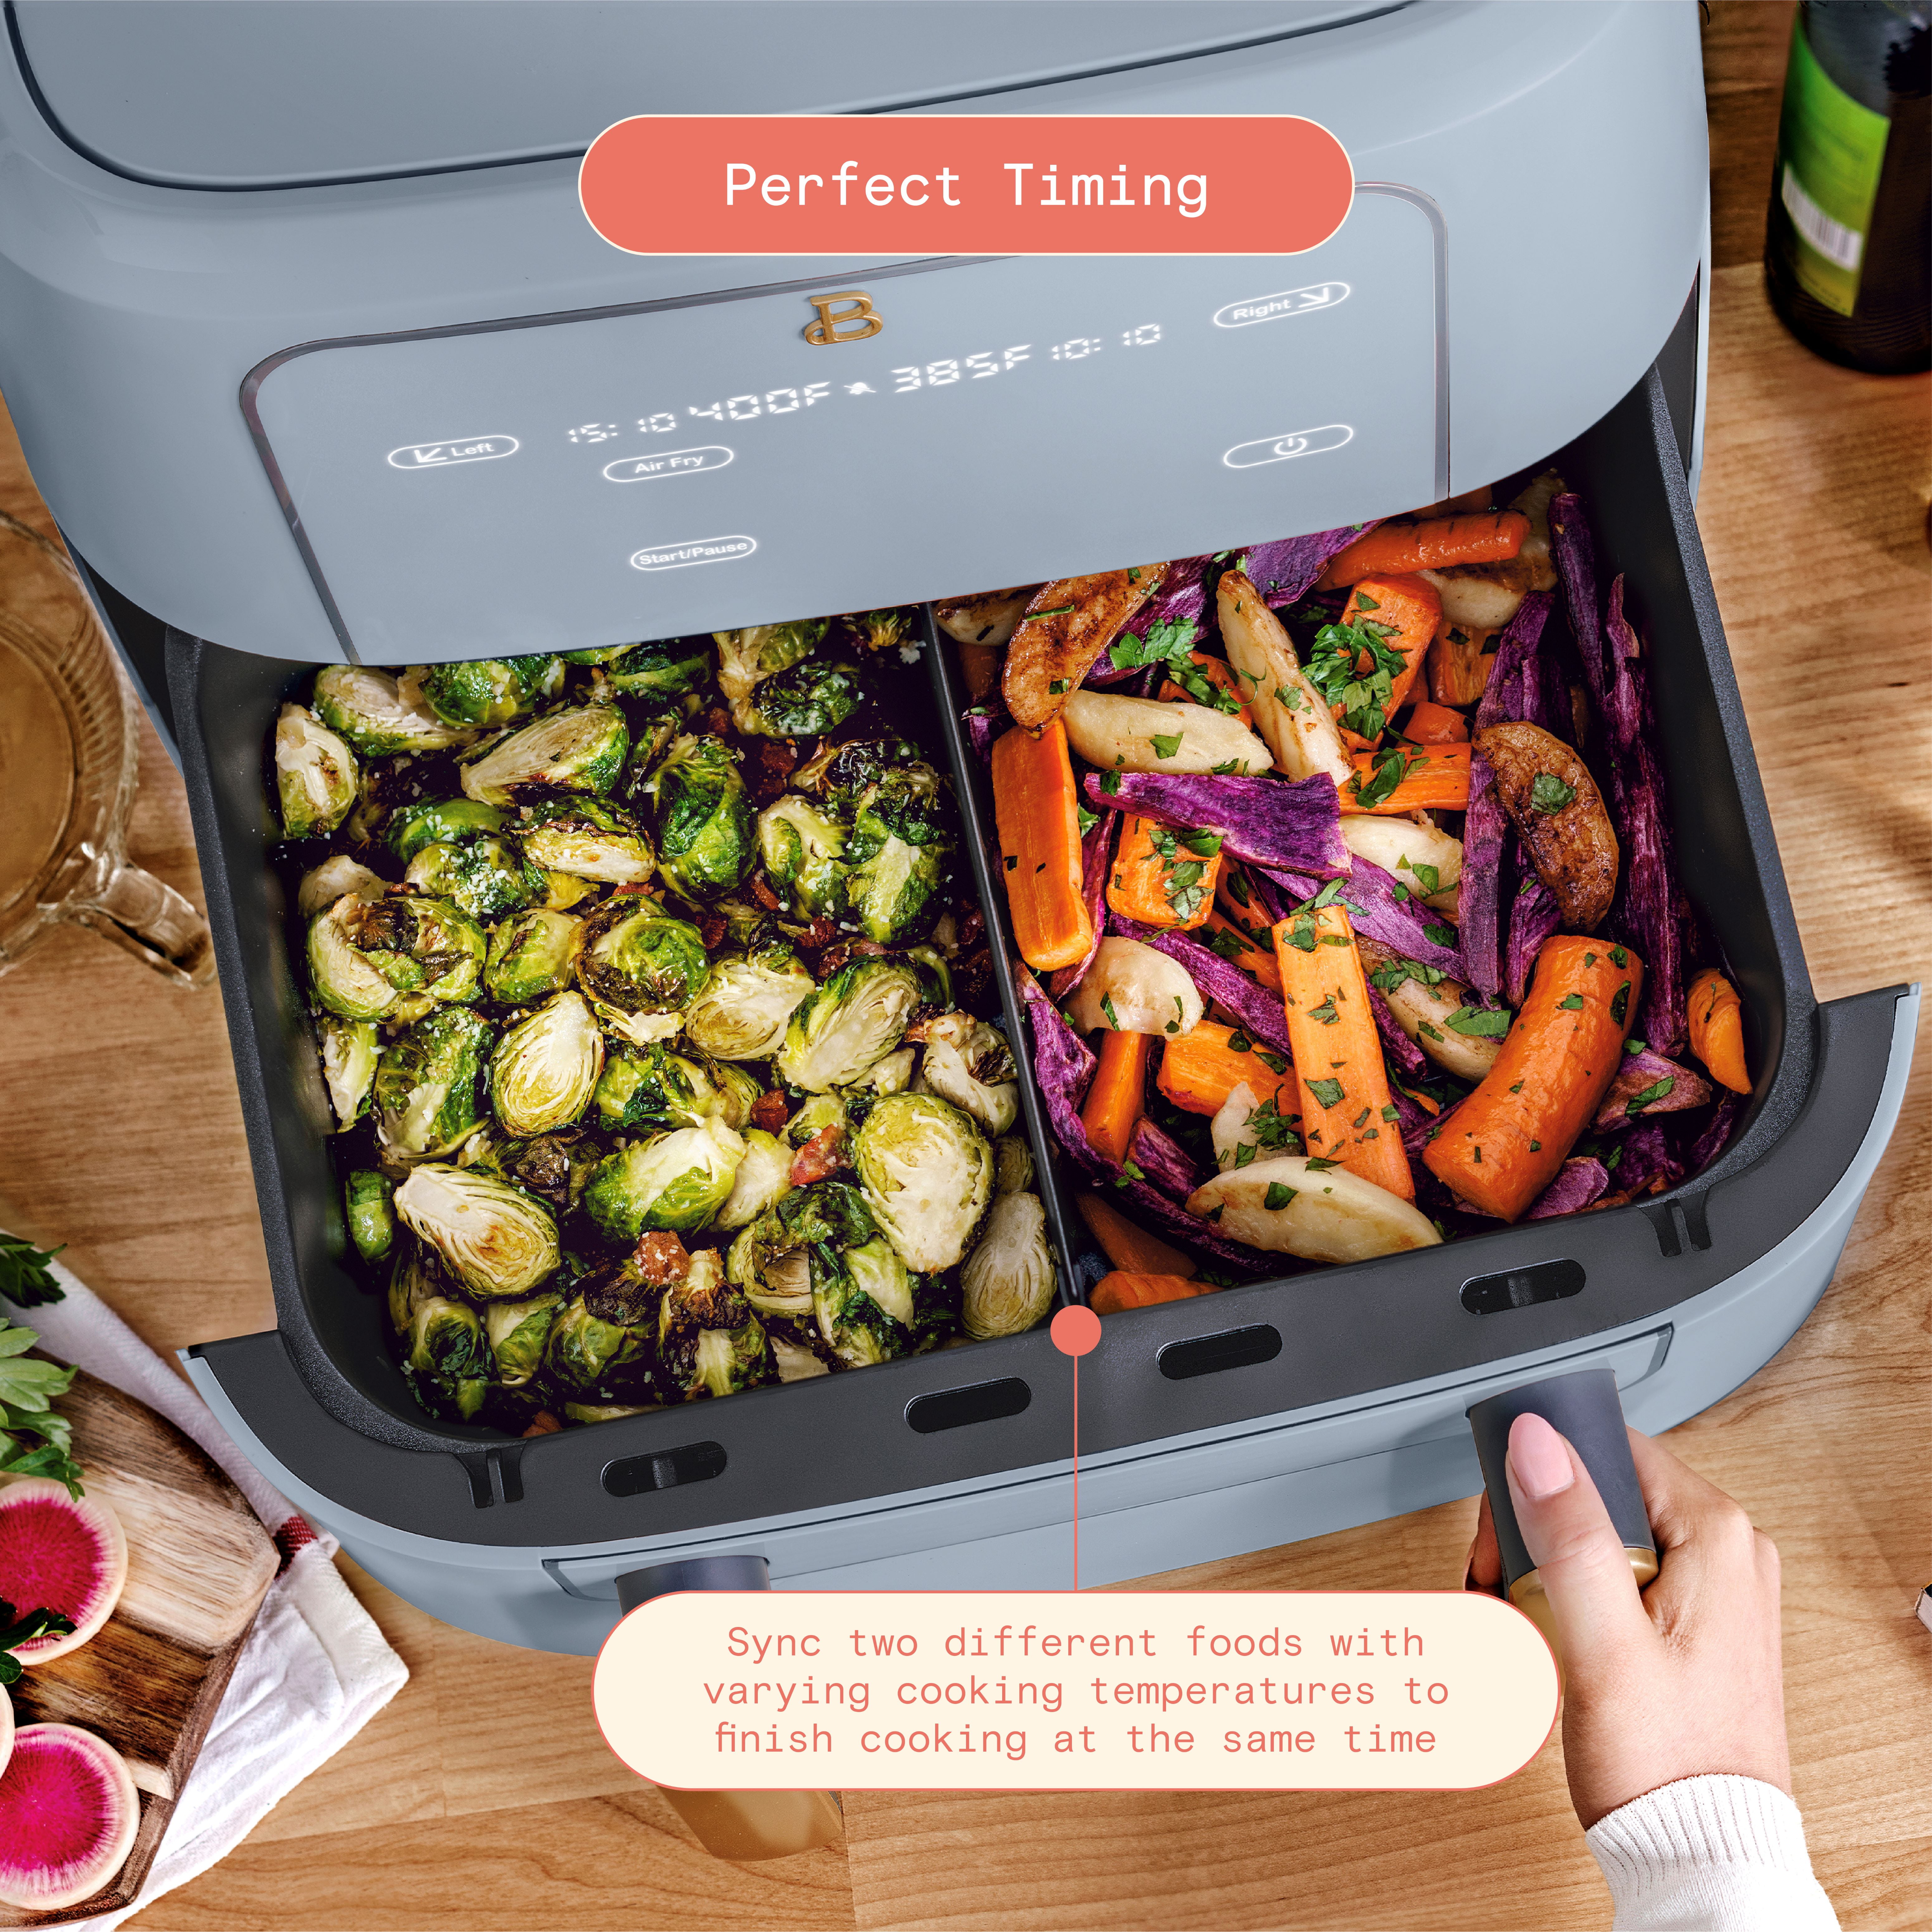 Beautiful 6 Qt Air Fryer with TurboCrisp Technology and Touch-Activated  Display, Cornflower Blue by Drew Barrymore 